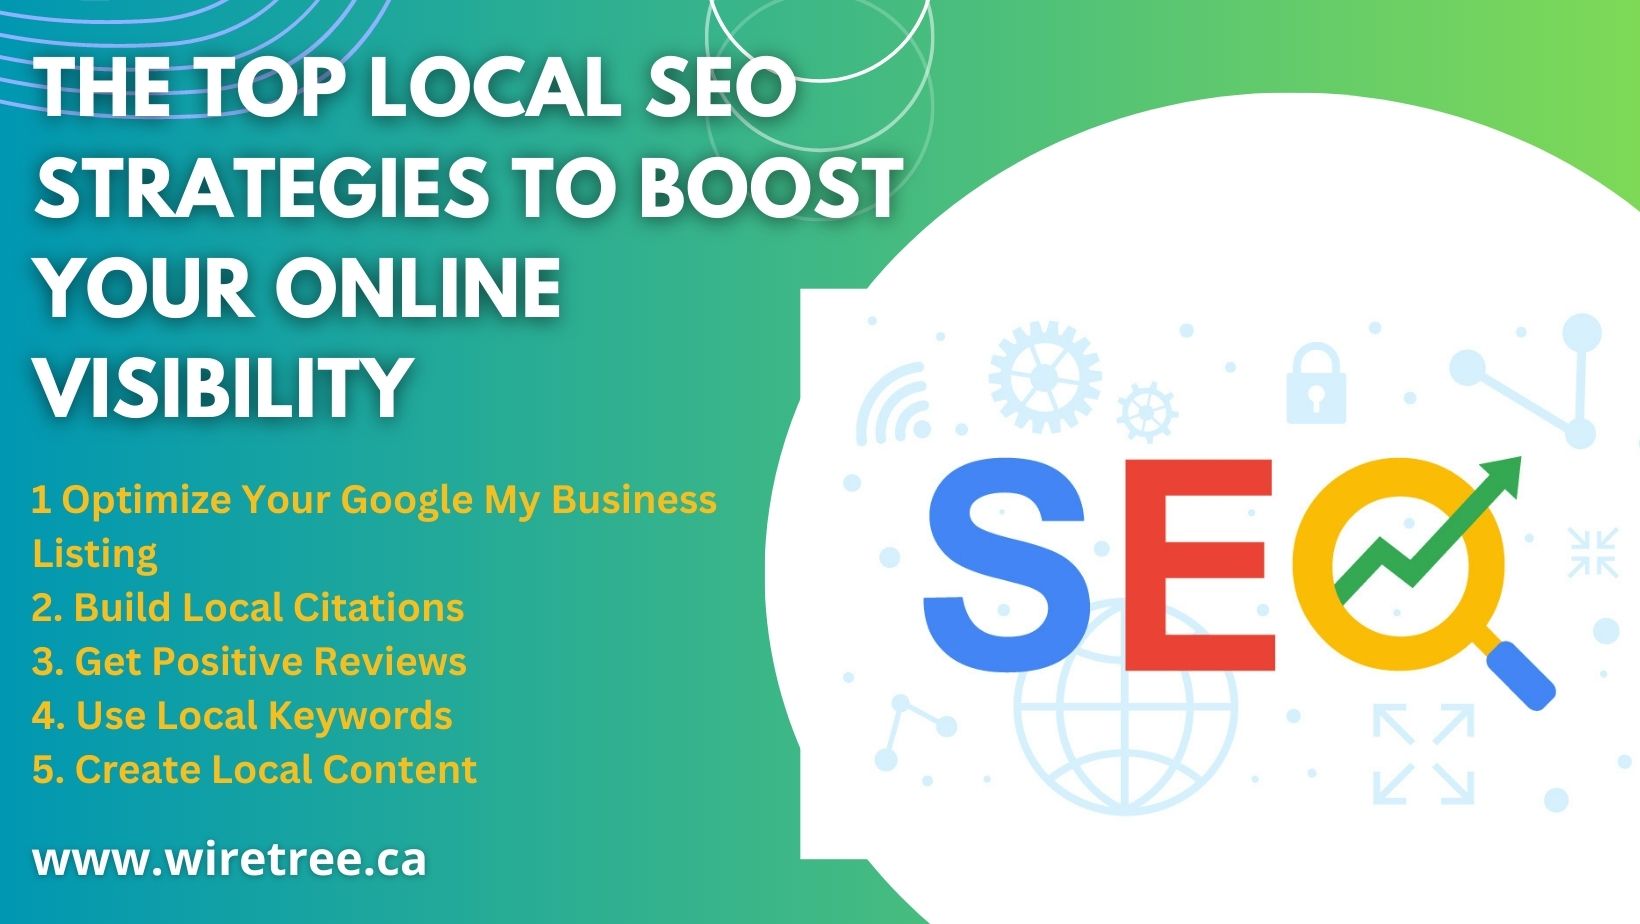 The Top Local SEO Strategies to Boost Your Online Visibility